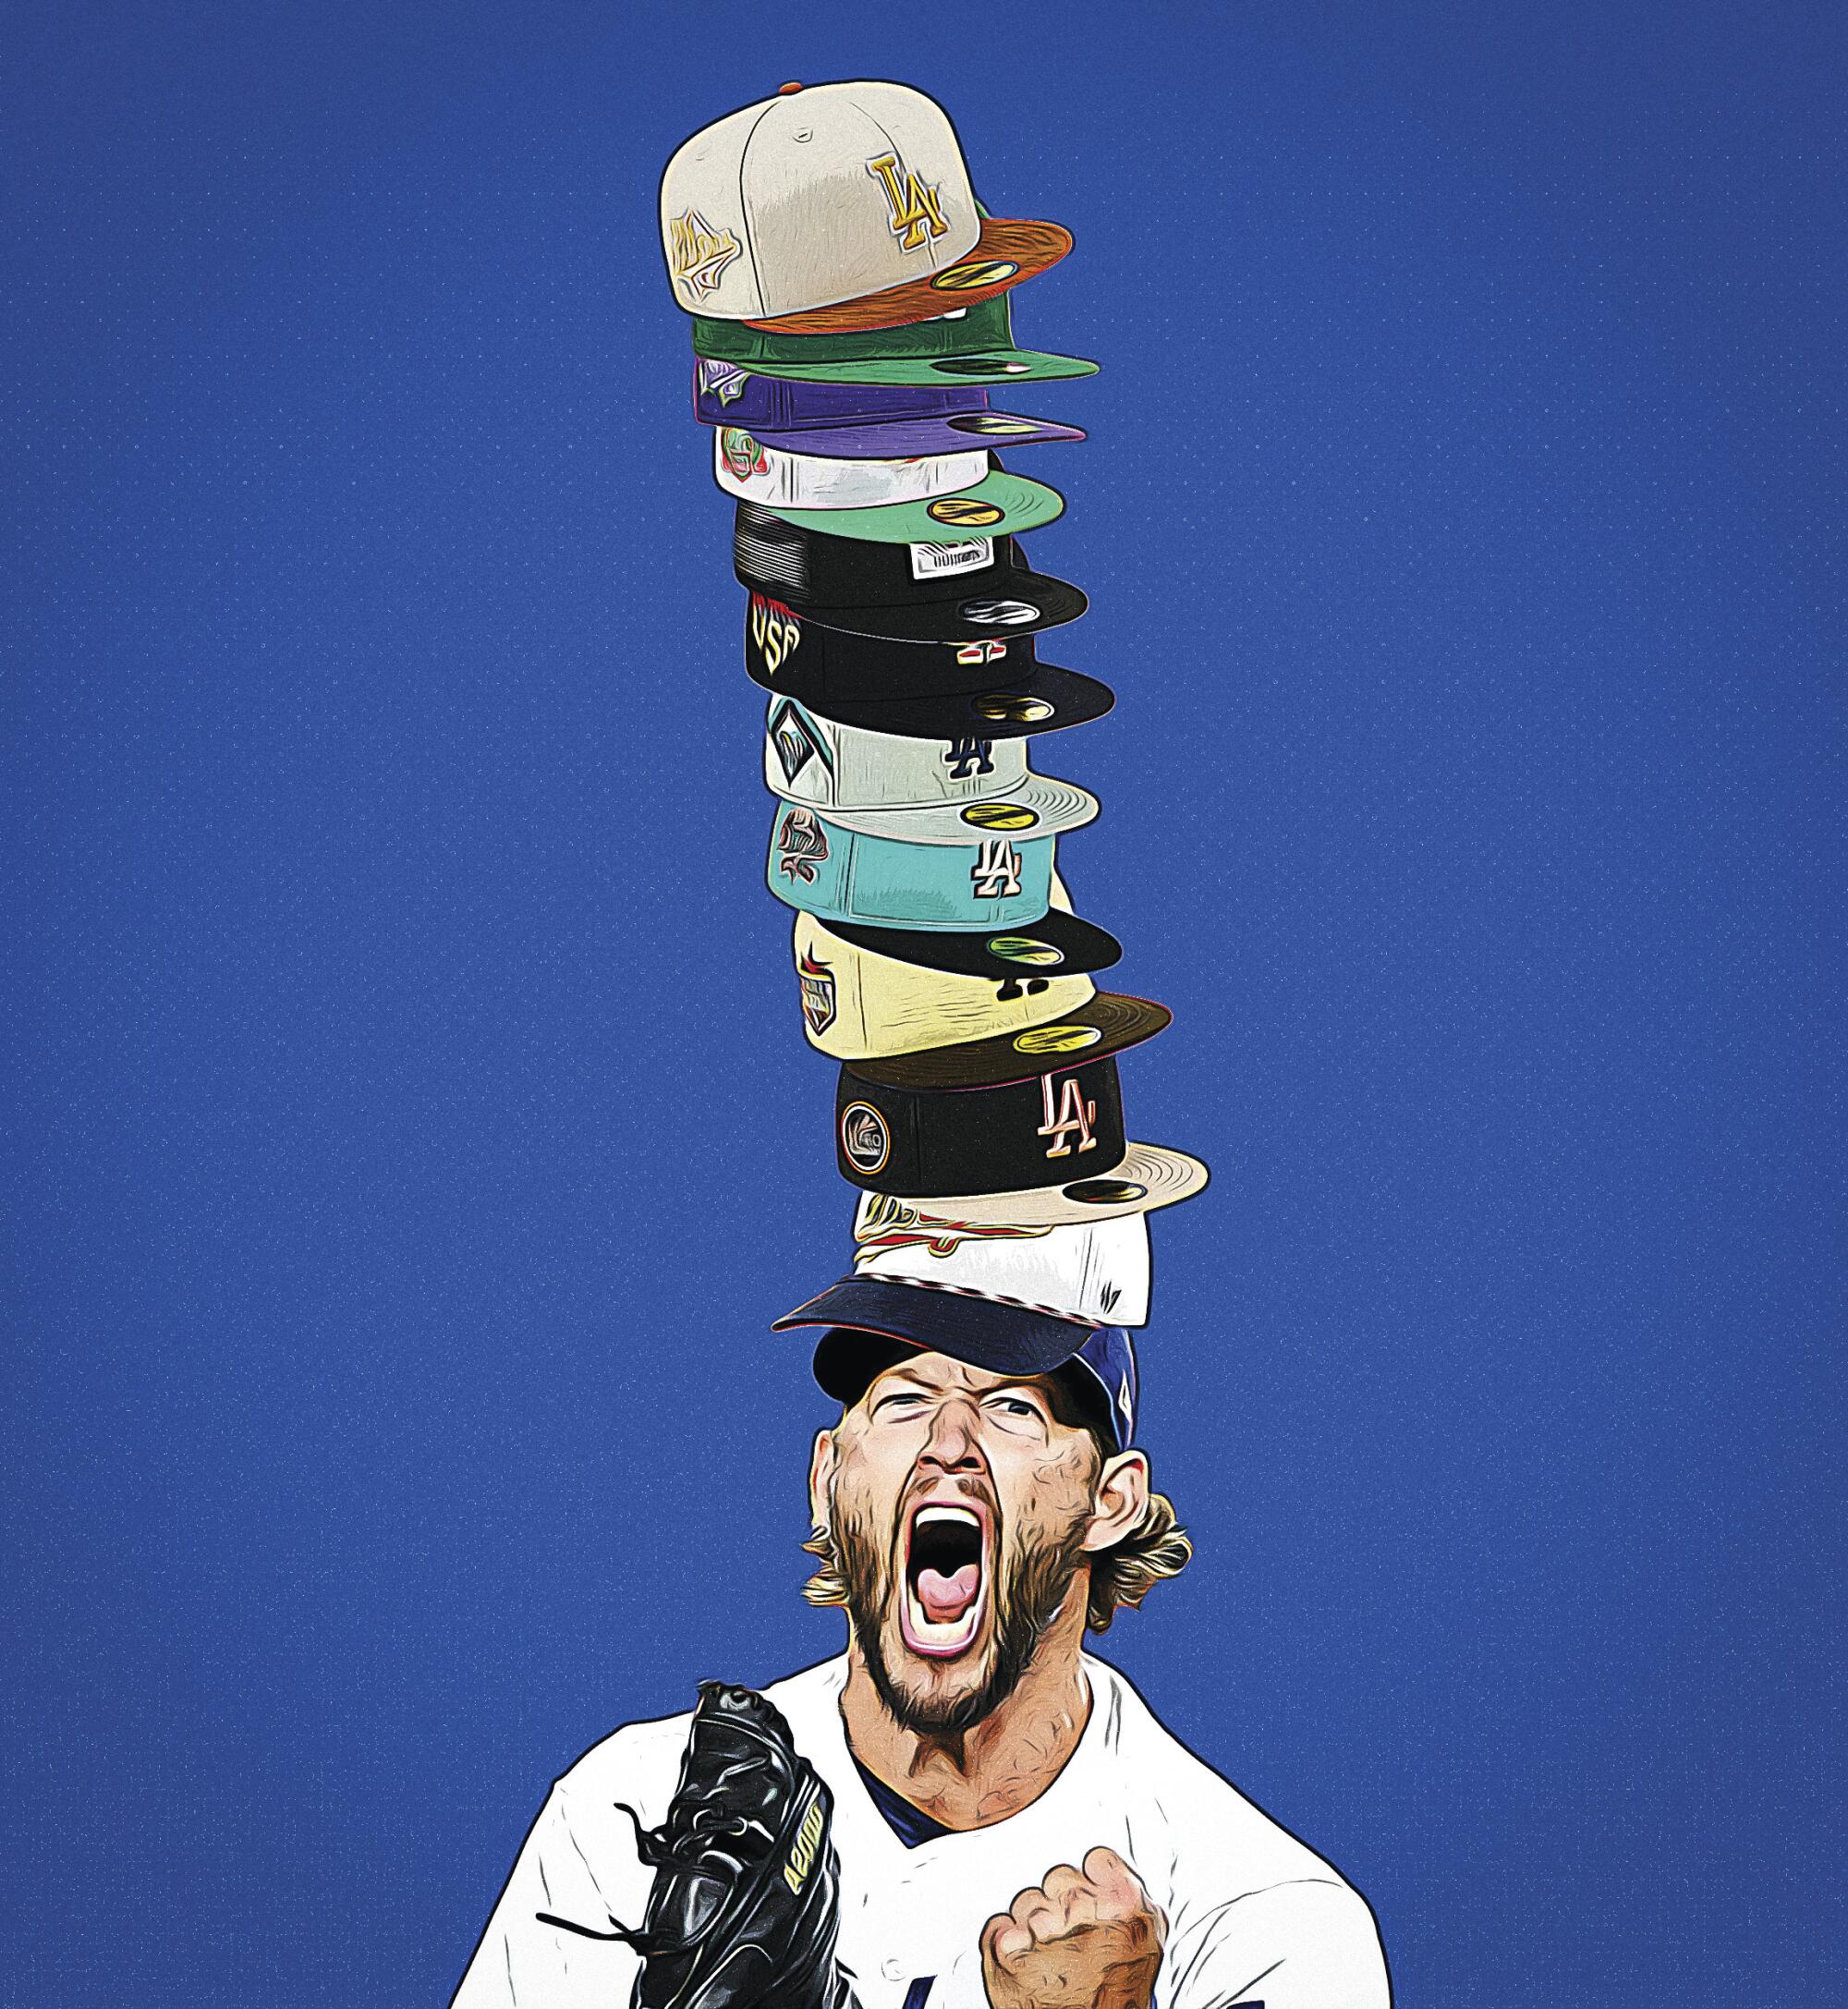 Clayton Kershaw is shown wearing a variety of multi-color Dodger caps.